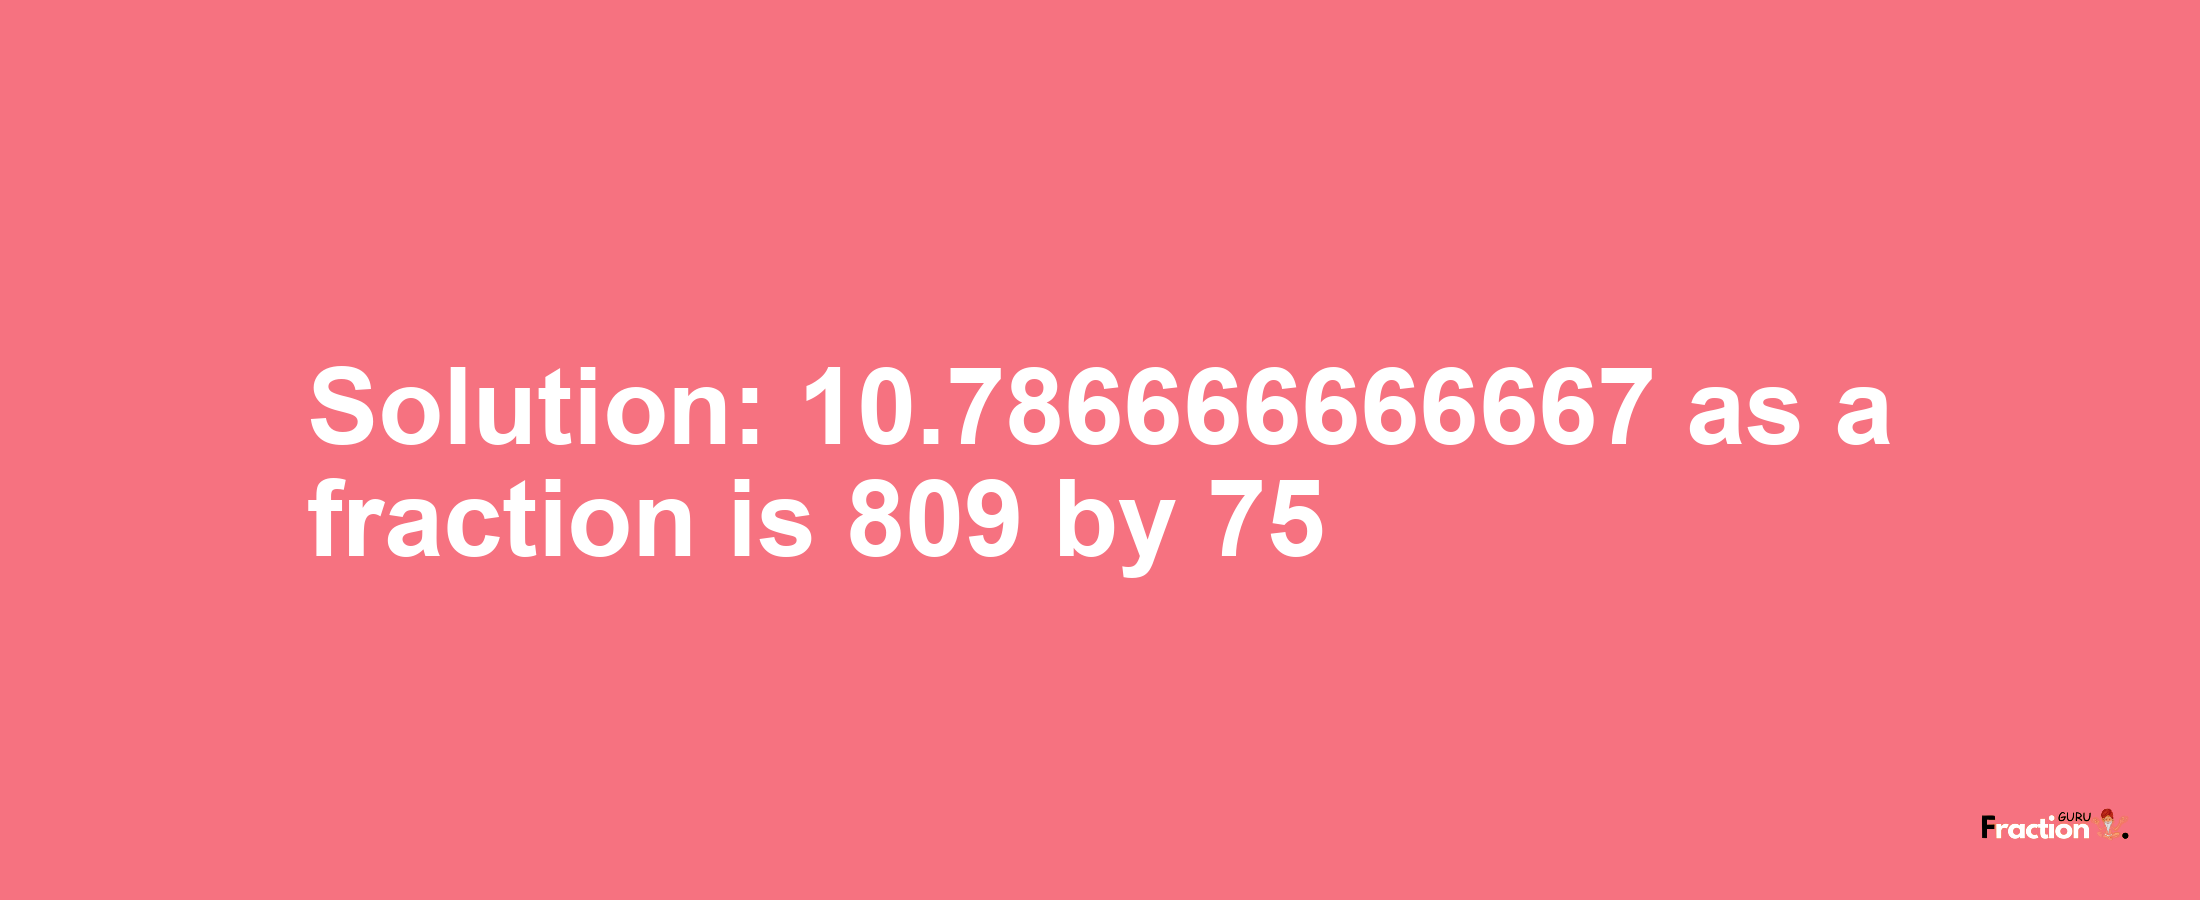 Solution:10.786666666667 as a fraction is 809/75